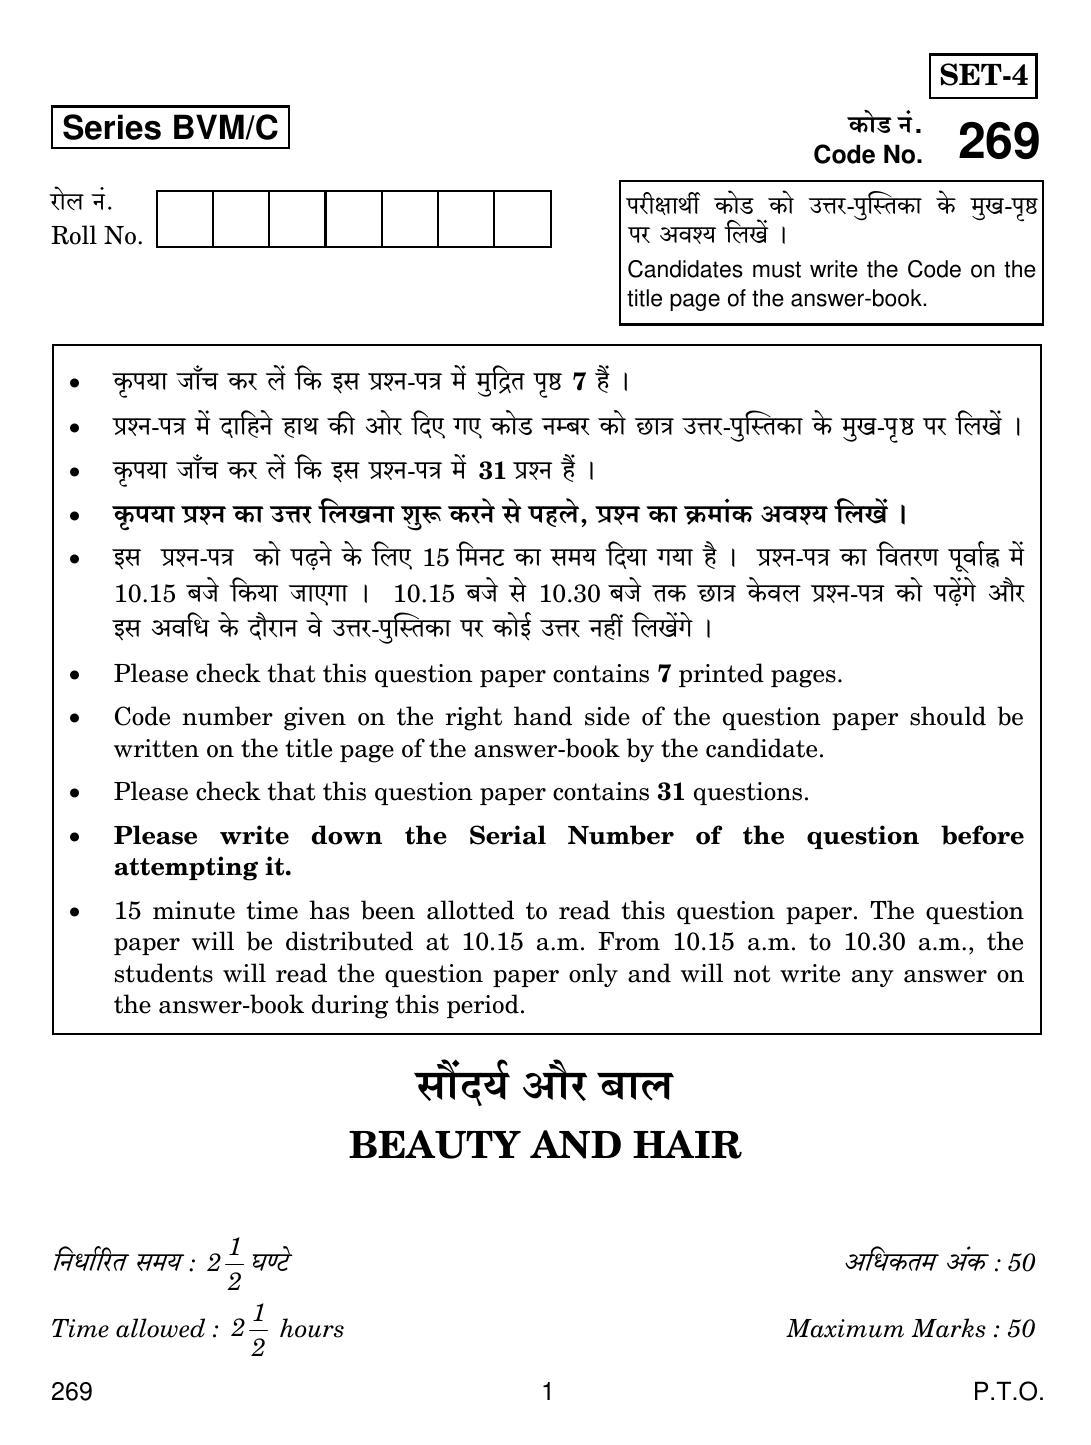 CBSE Class 12 269 BEAUTY AND HAIR 2019 Compartment Question Paper - Page 1